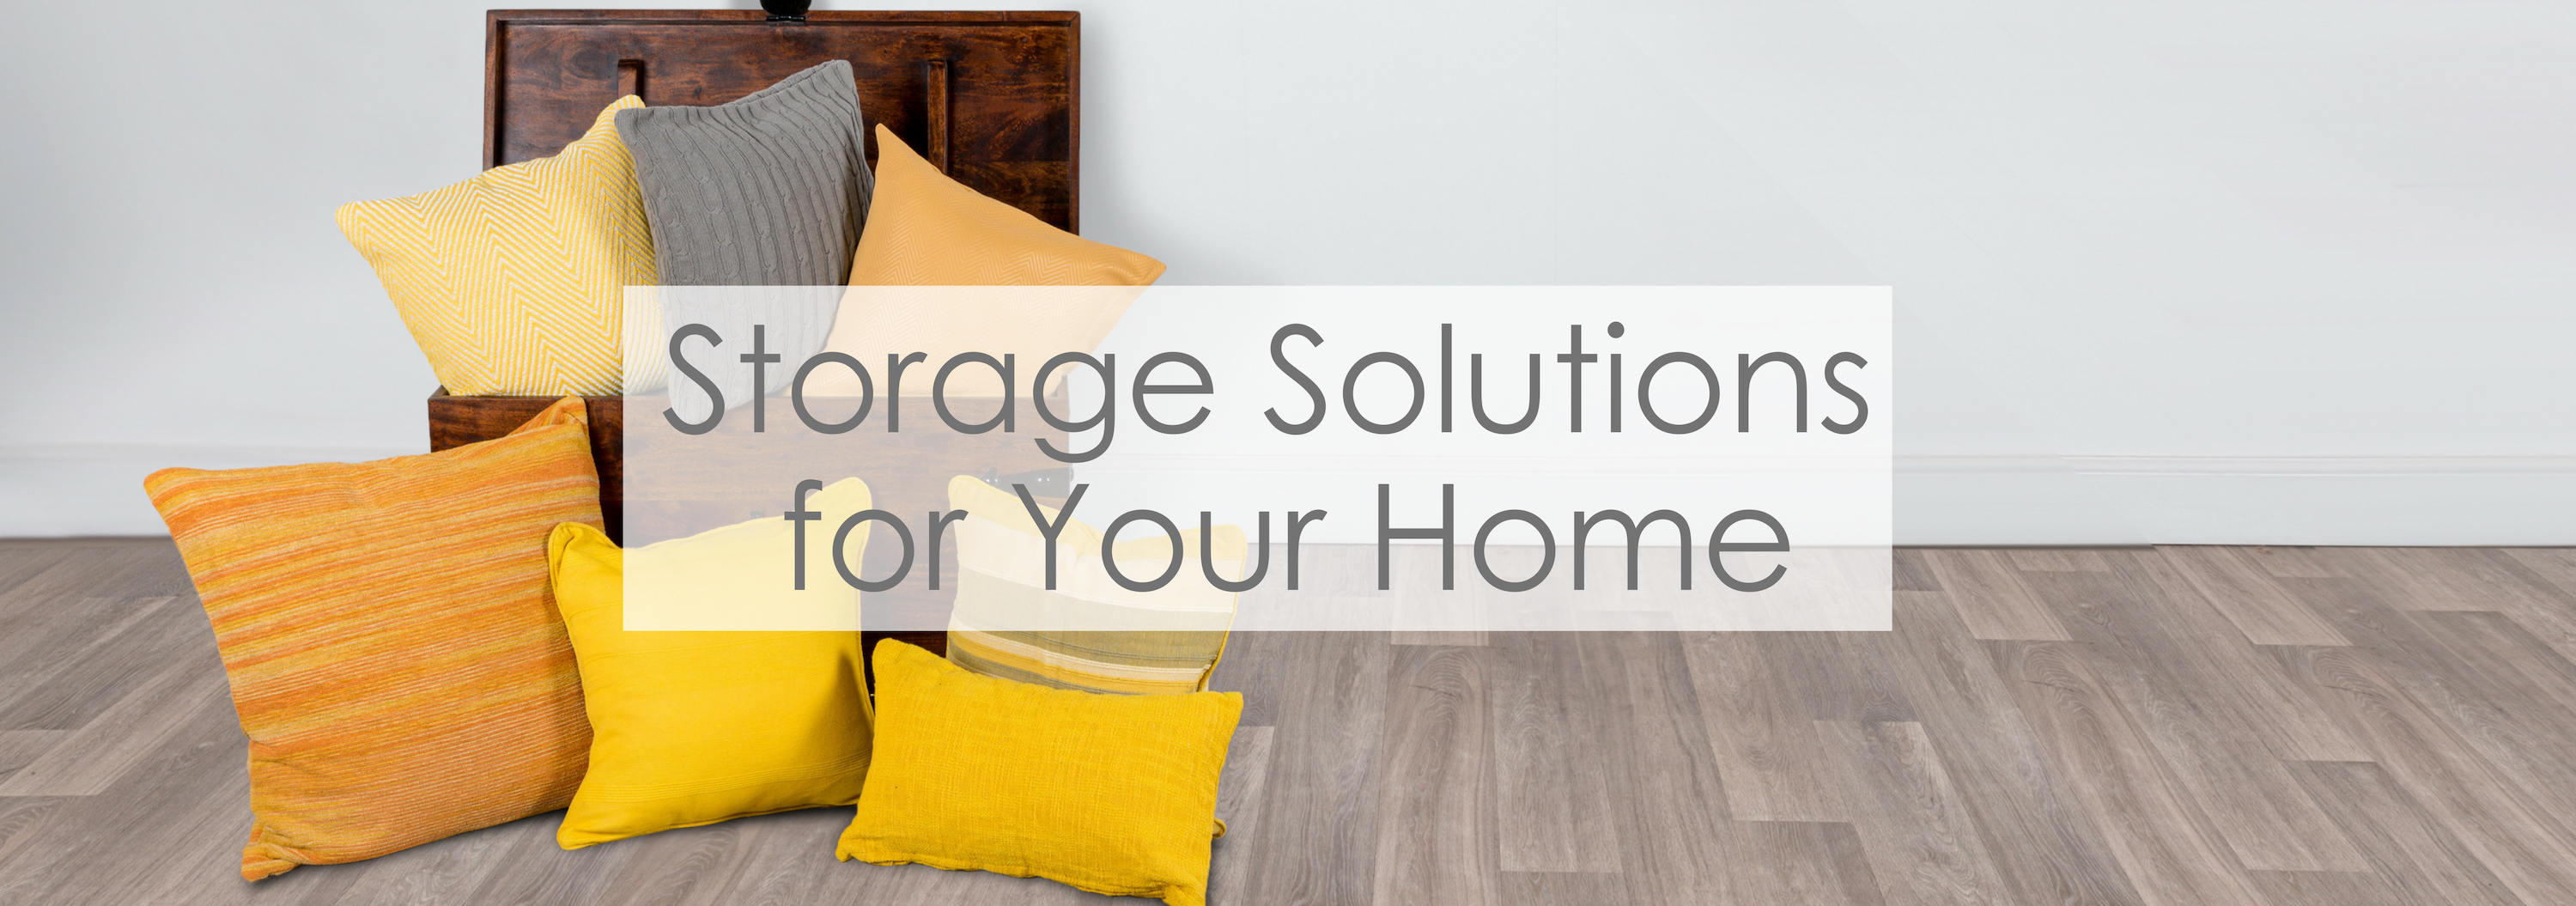 storage solutions for home